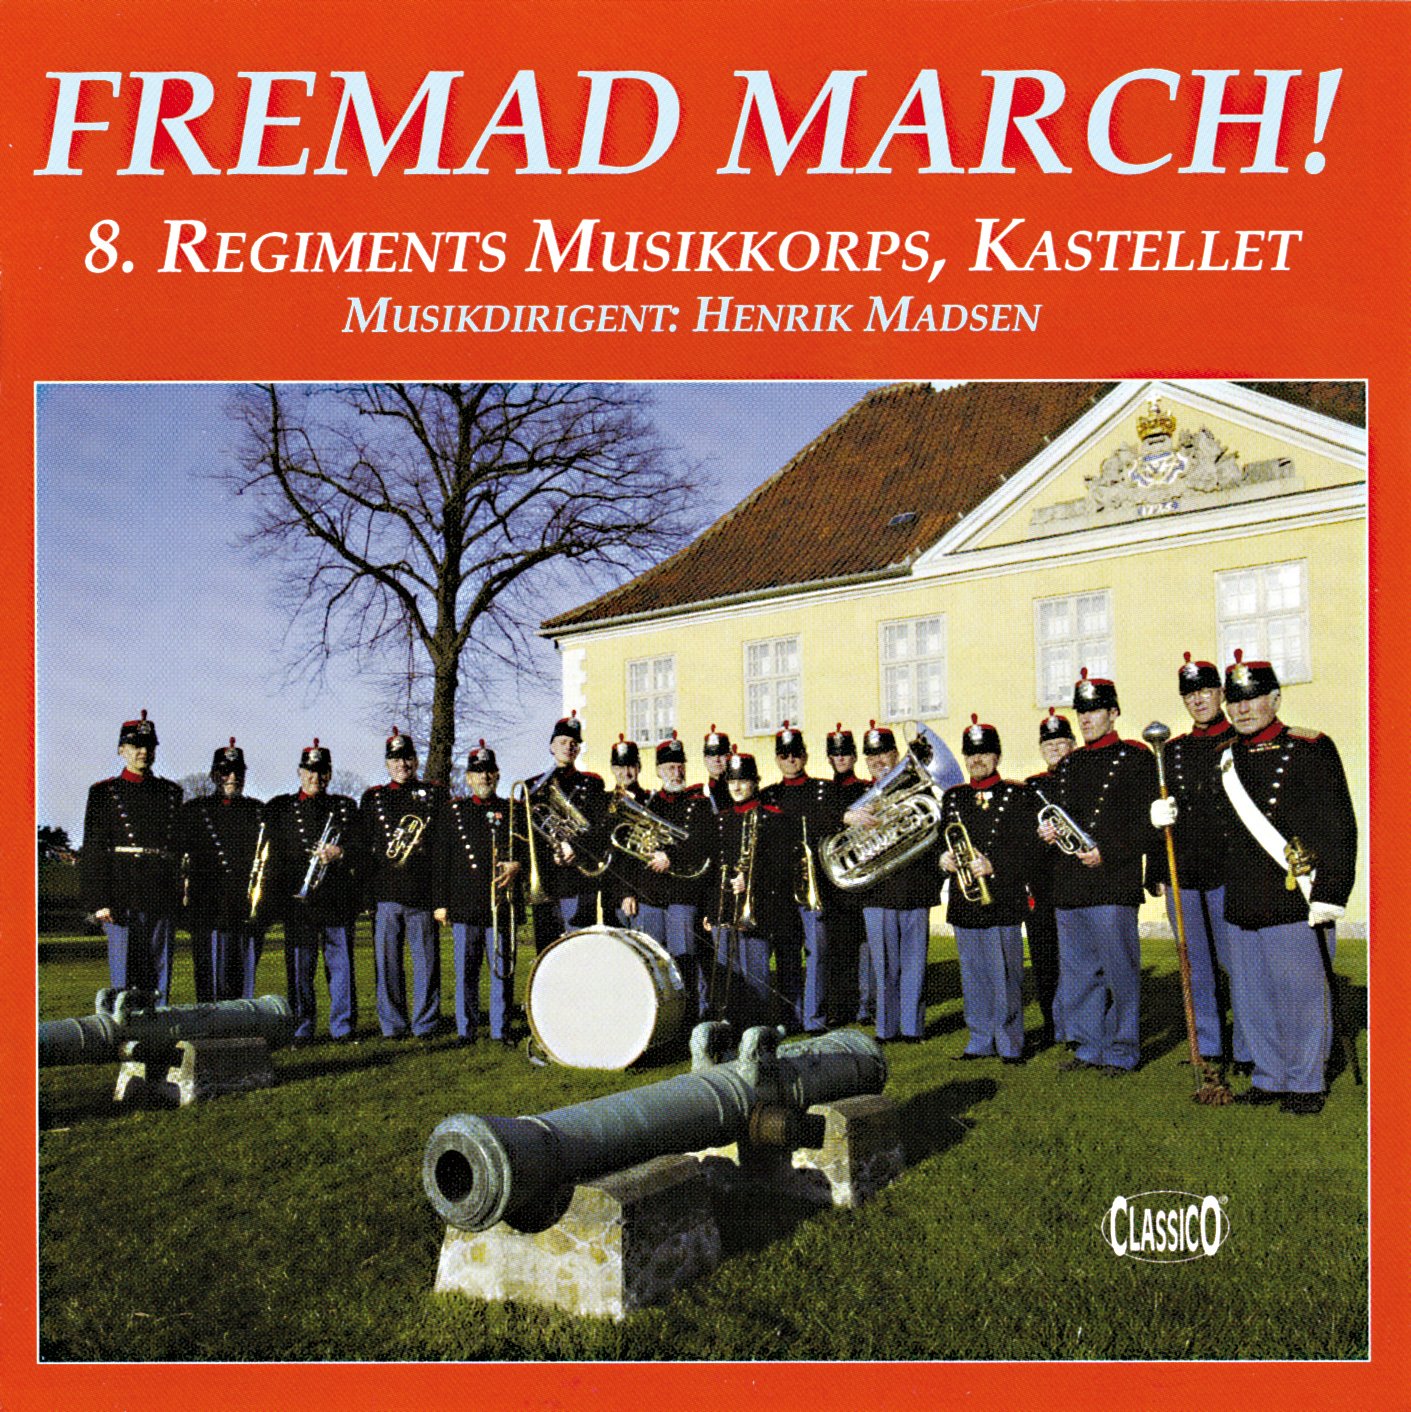 FREMAD MARCH! (Forward March!) - 8th Regiment Musikkorps